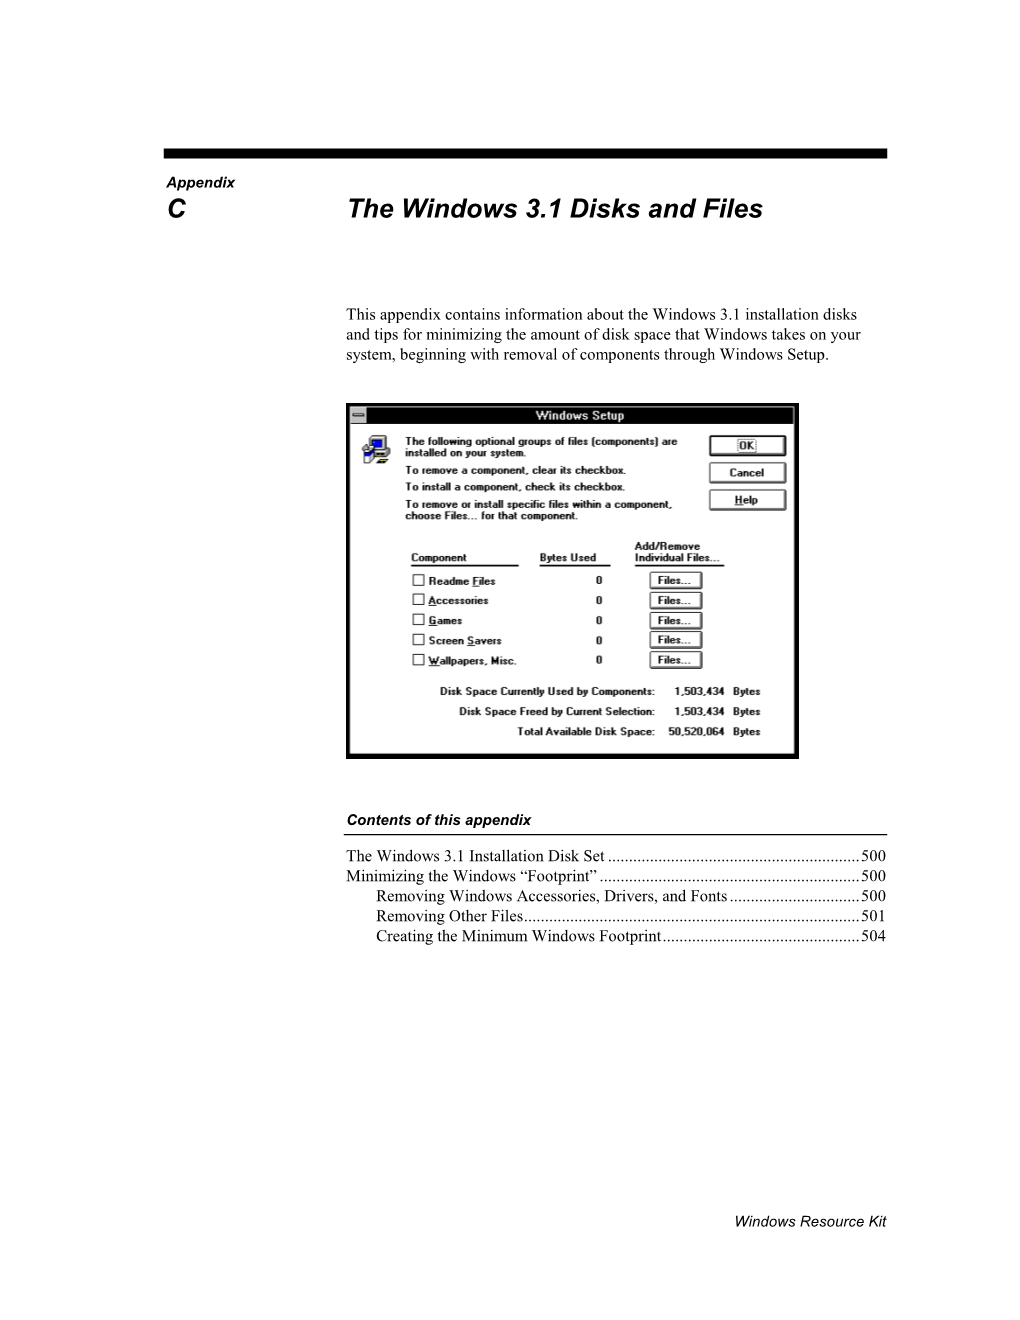 Appendix C the Windows 3.1 Disks and Files